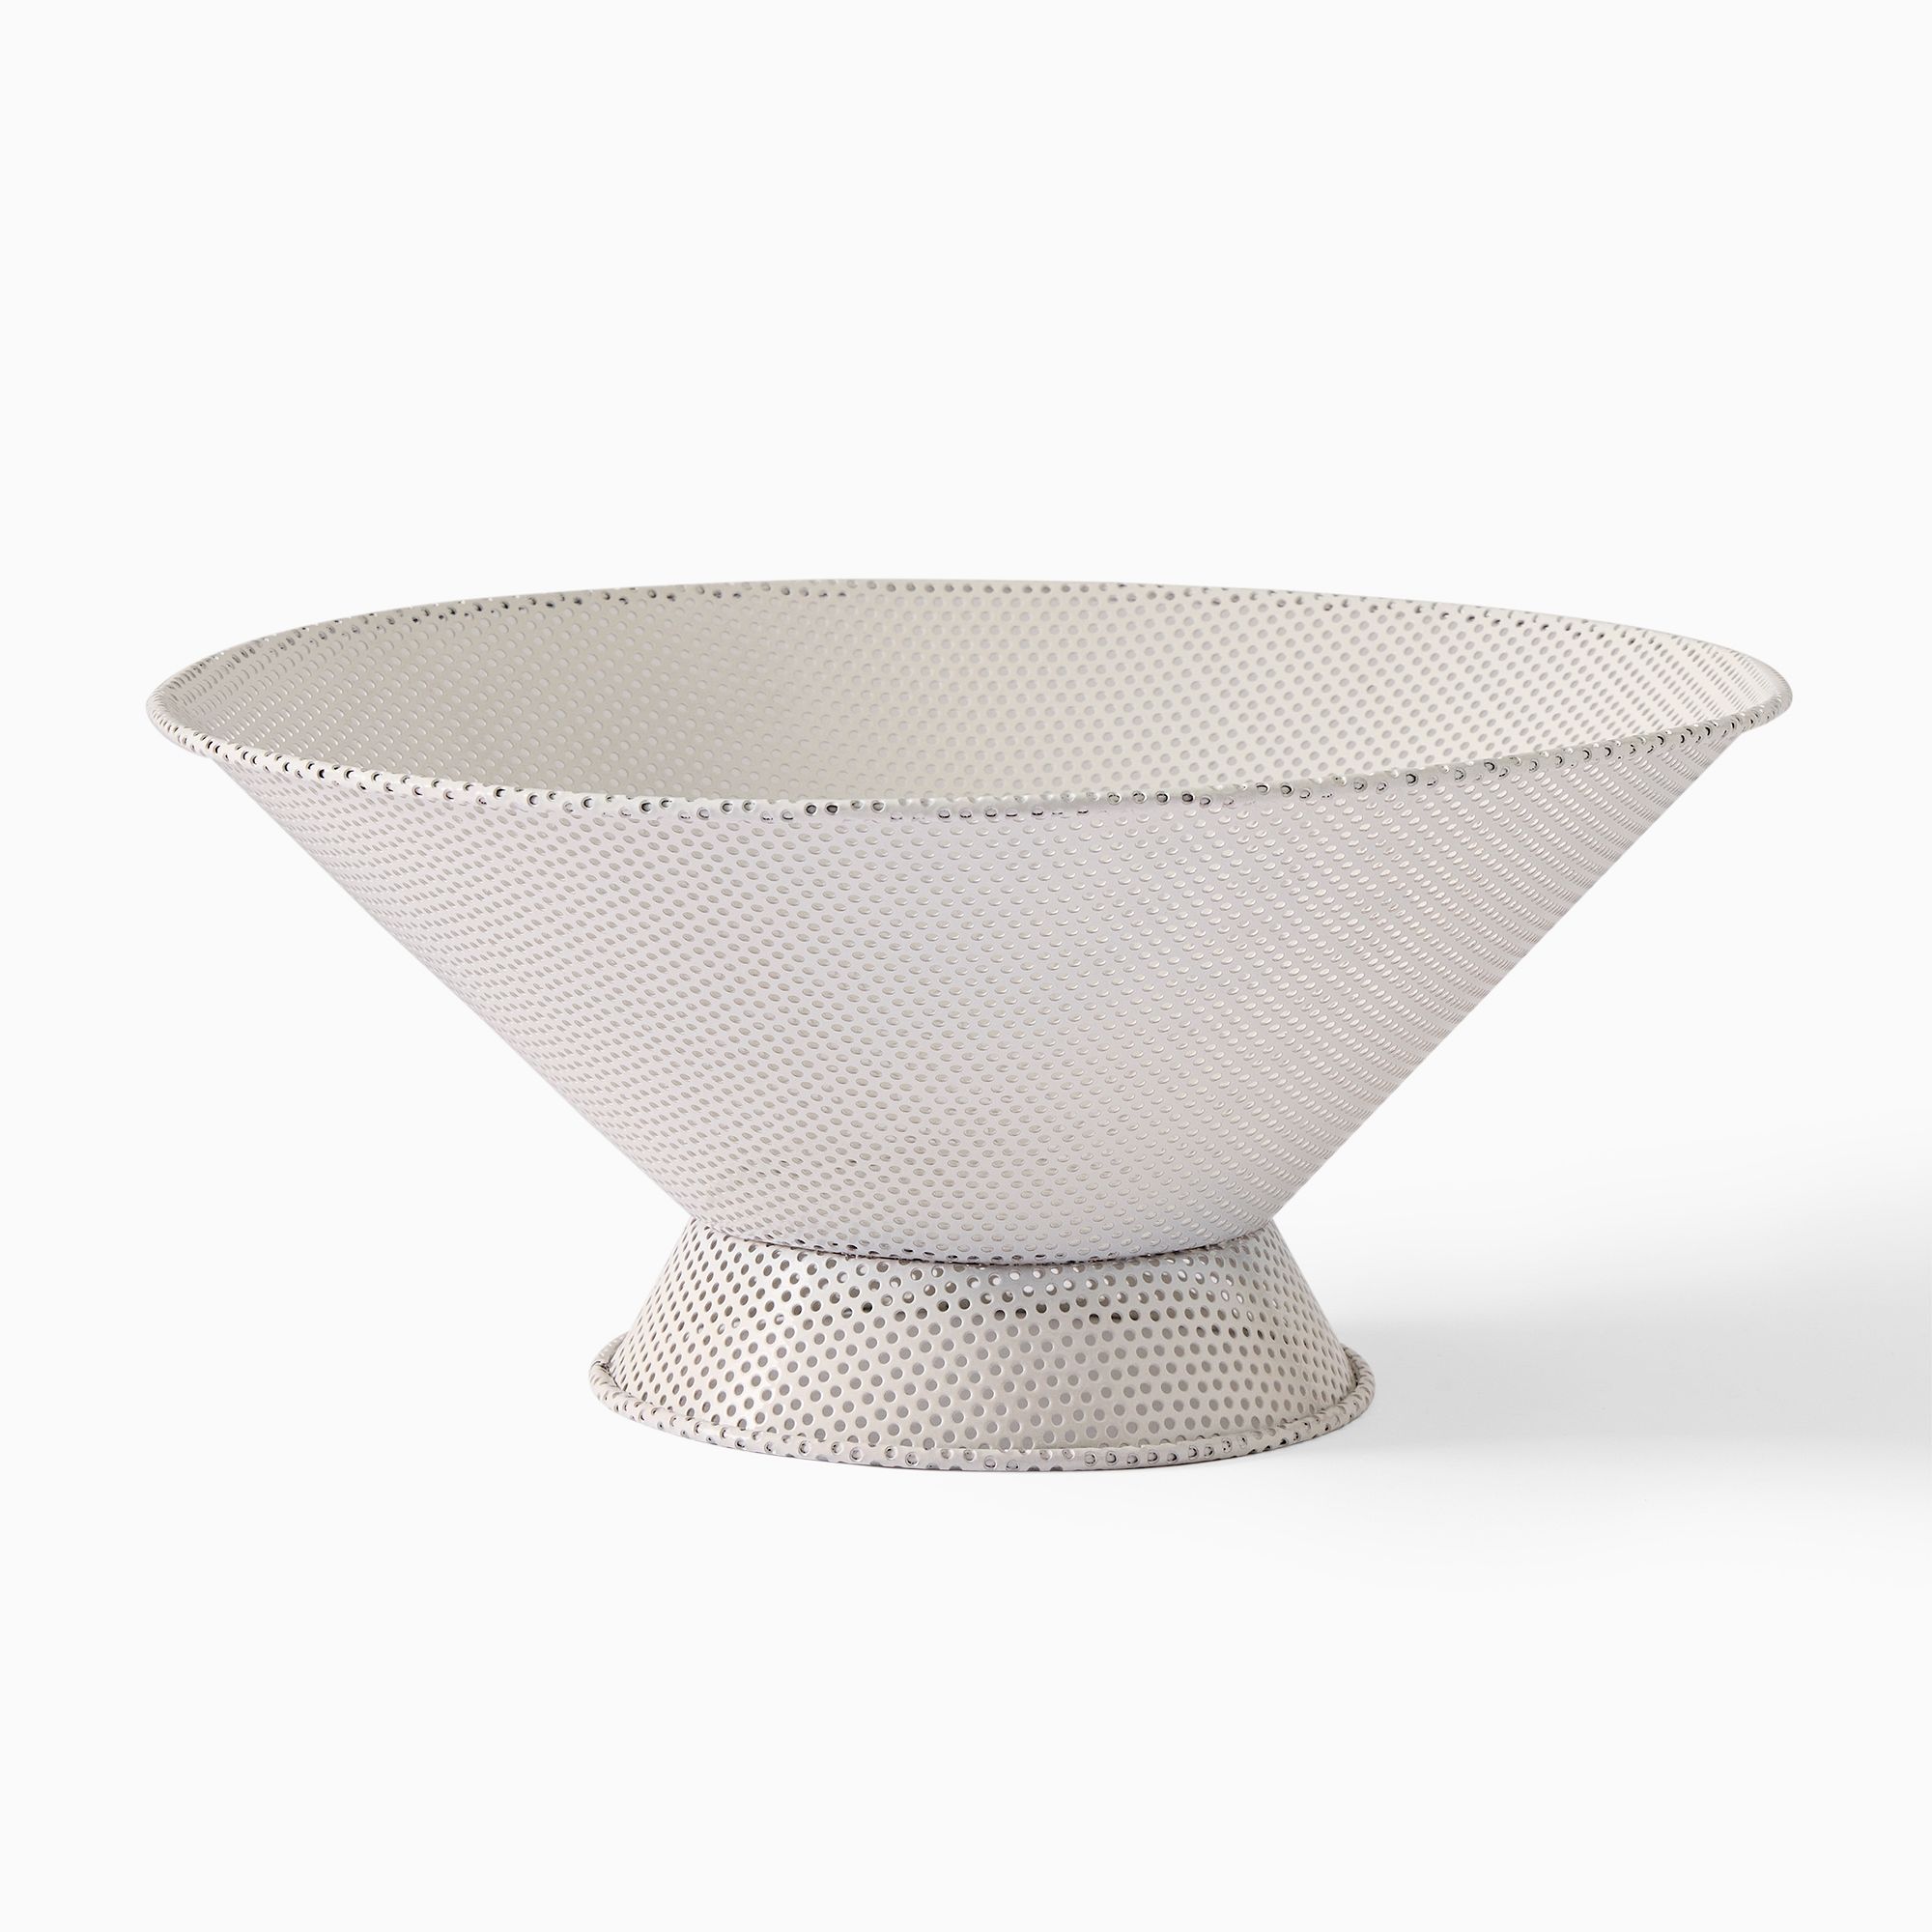 Billy Cotton Perforated Metal Fruit Bowl | West Elm